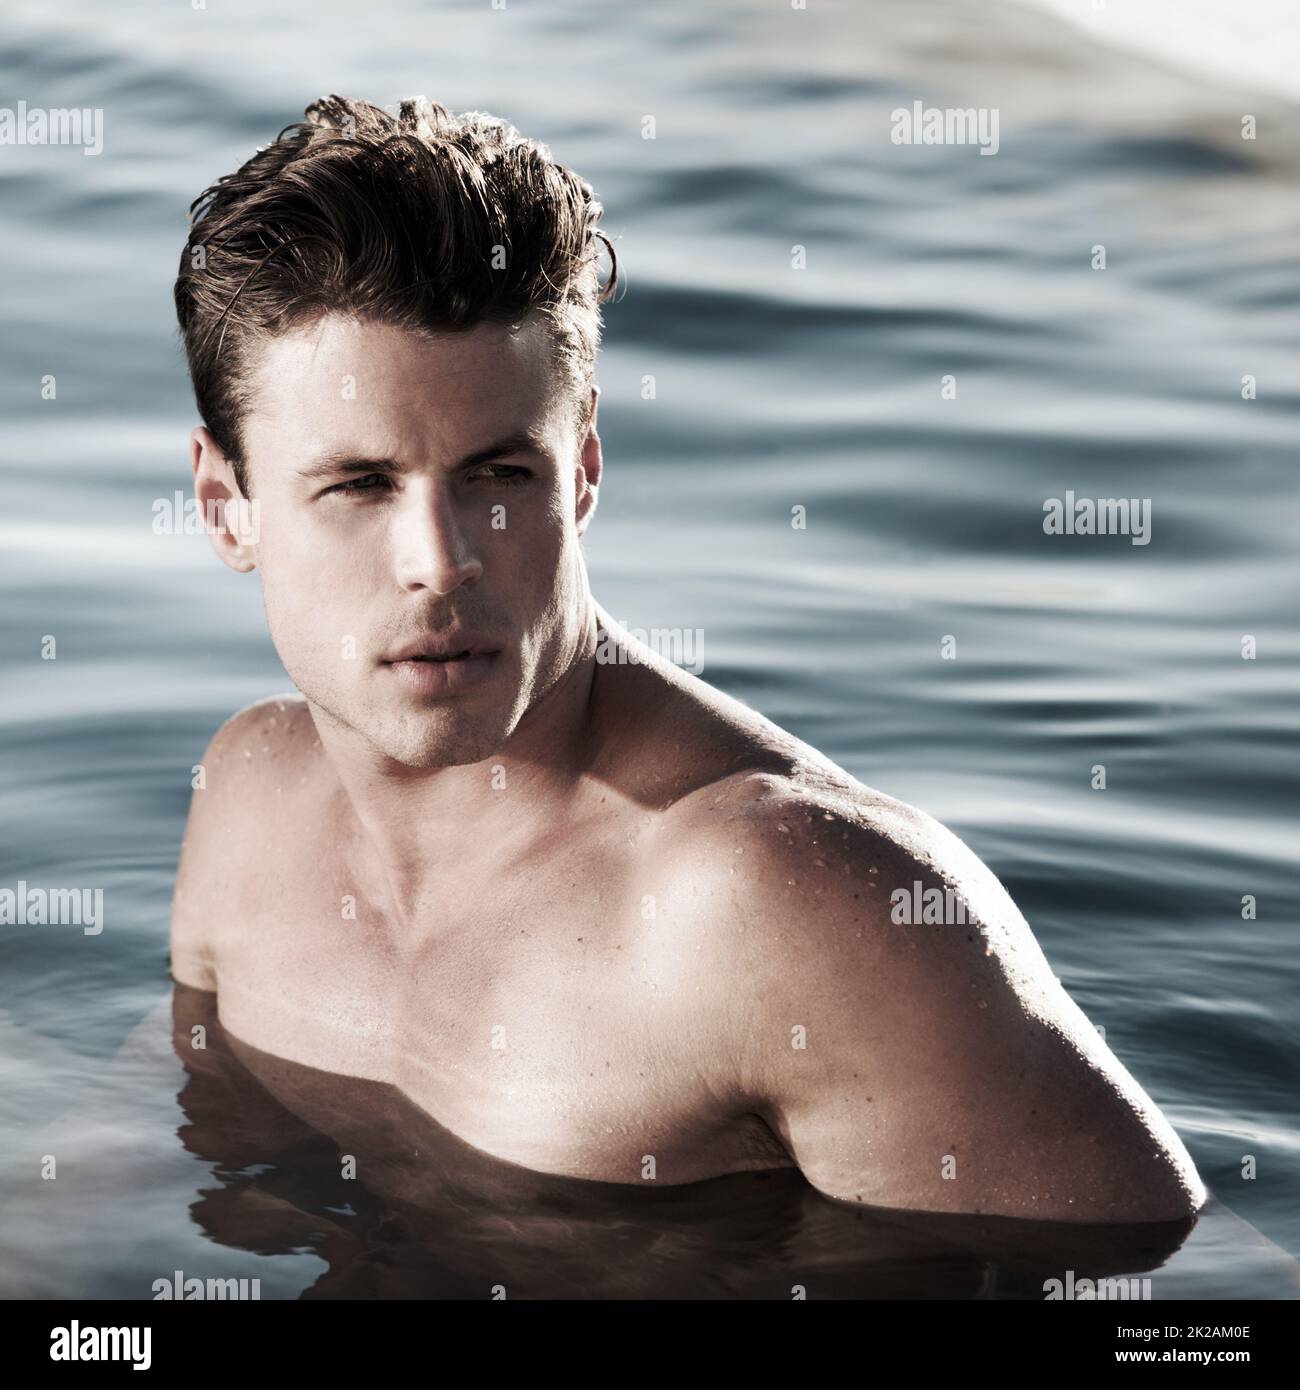 A moment to myself. A handsome male model in water looking to the side. Stock Photo